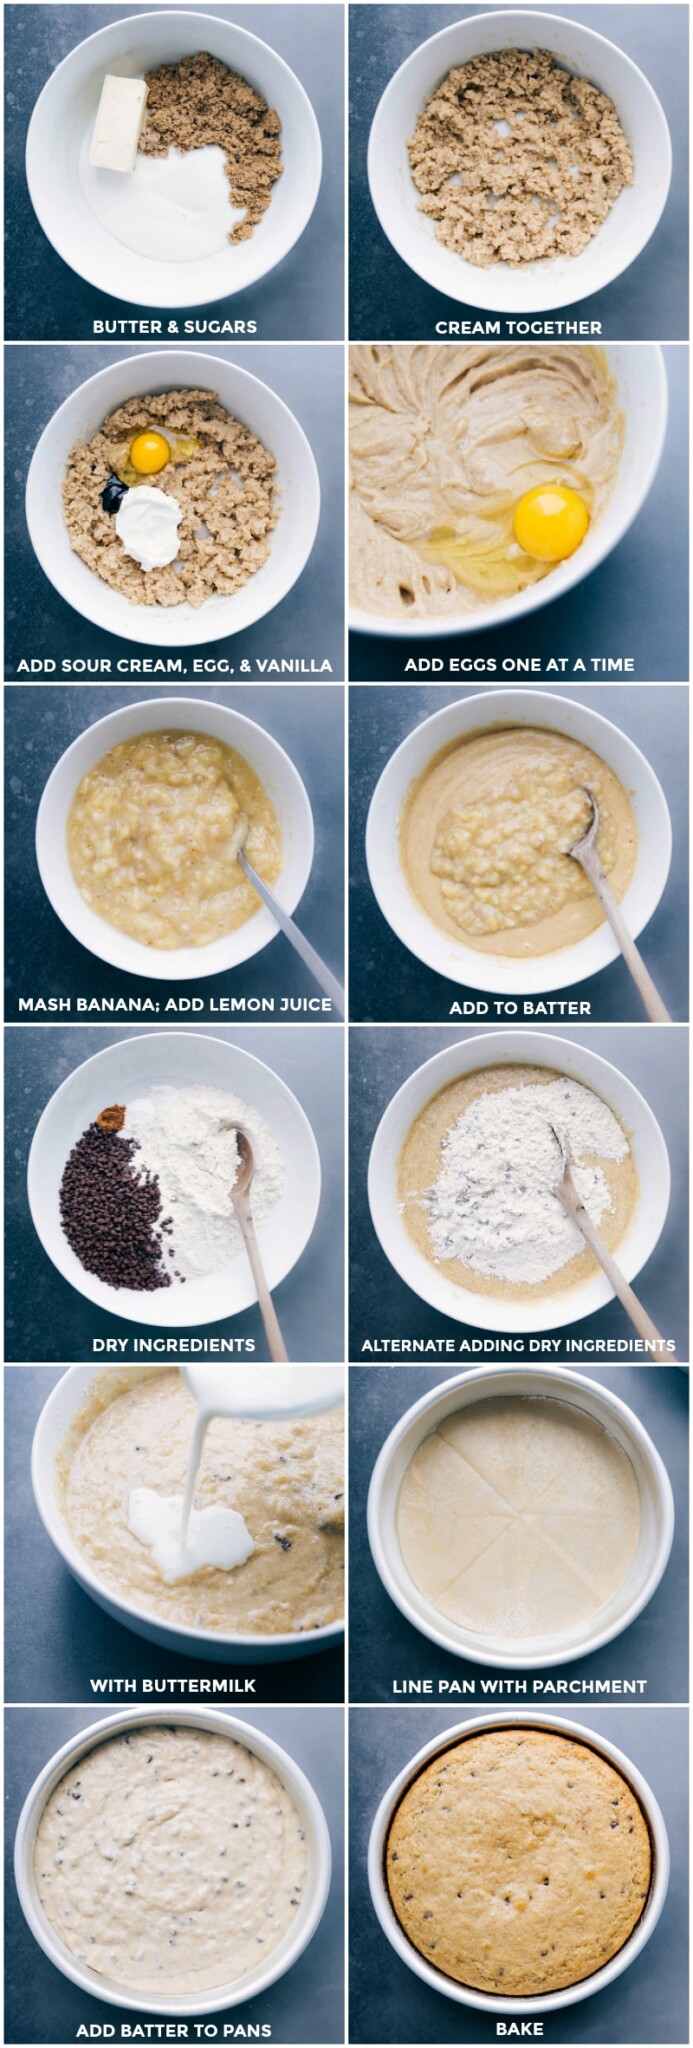 Images of the wet and dry ingredients being mixed together; poured into a prepared cake pan; and being baked.